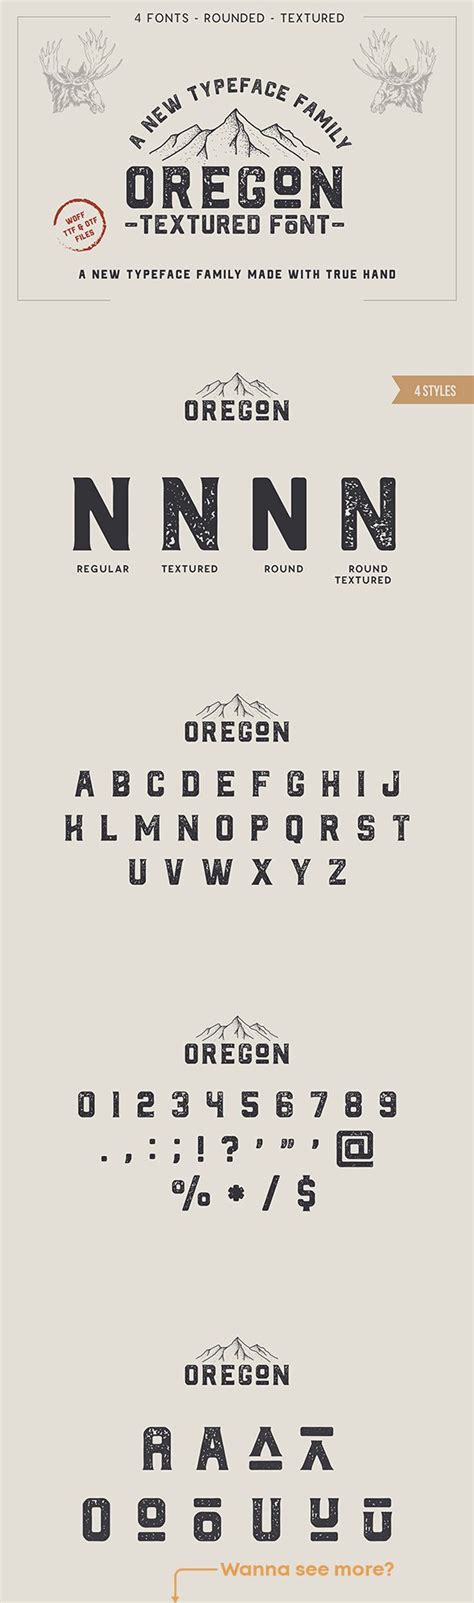 Pin On Fonts Typography Graphic Assets